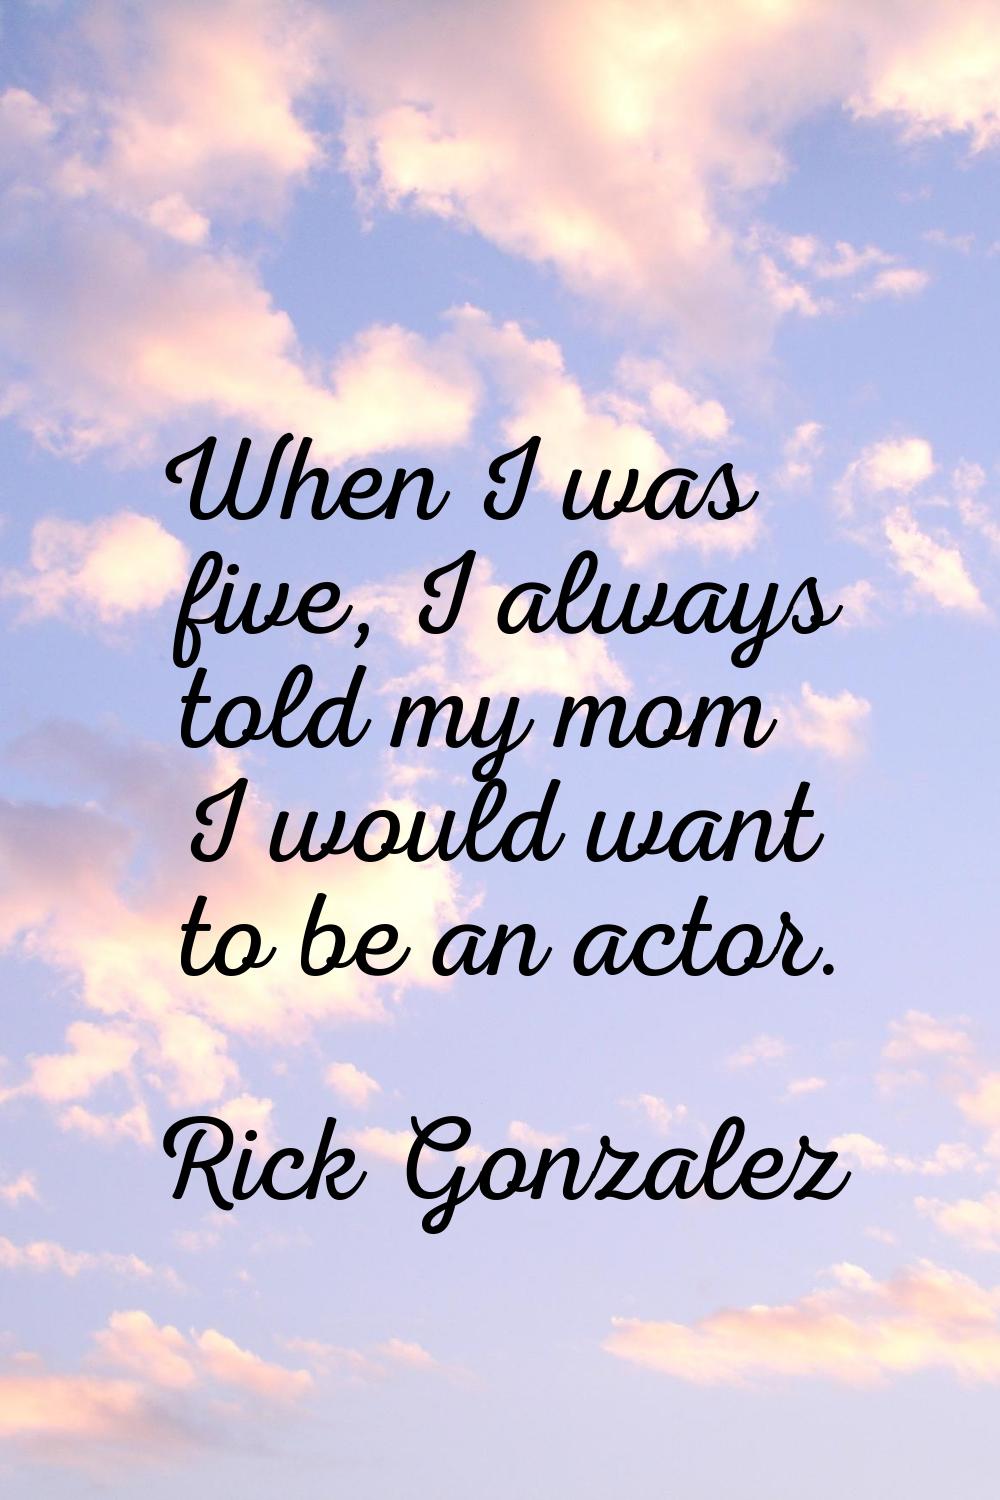 When I was five, I always told my mom I would want to be an actor.